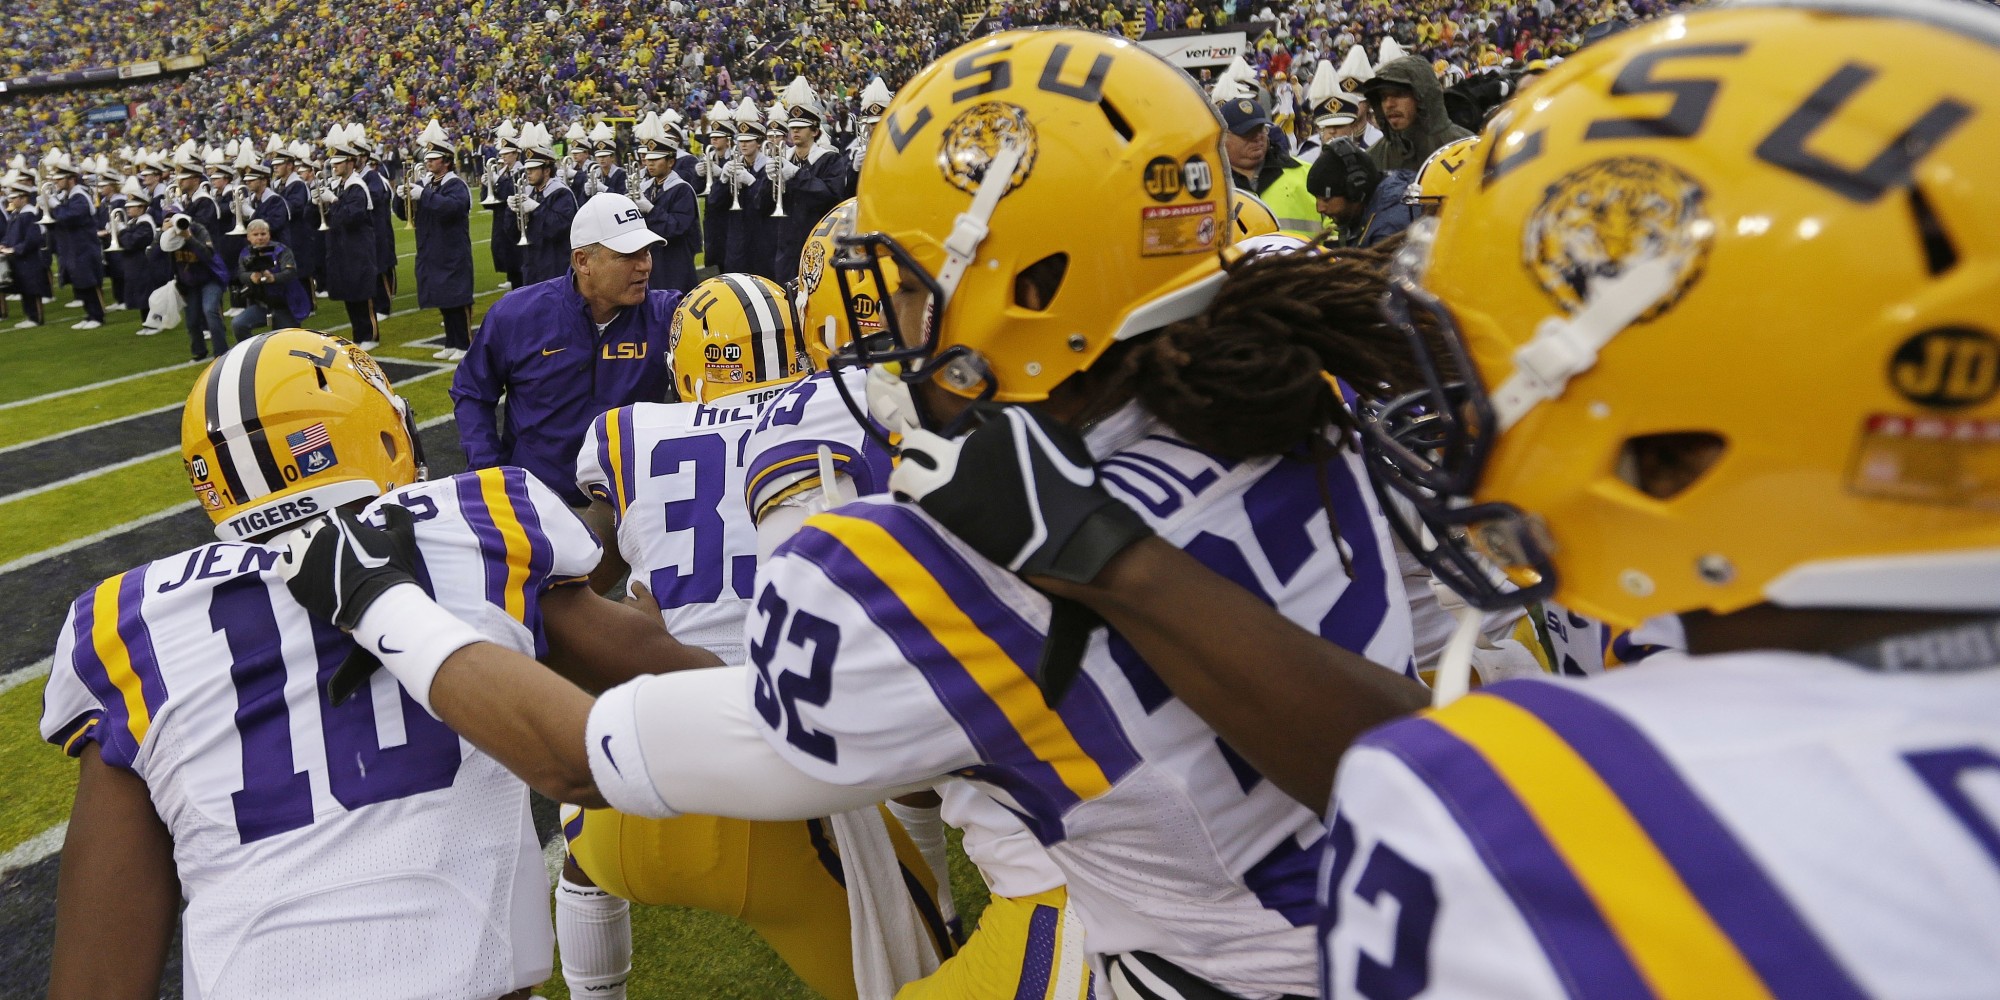 Lsu Football Uniforms Picture